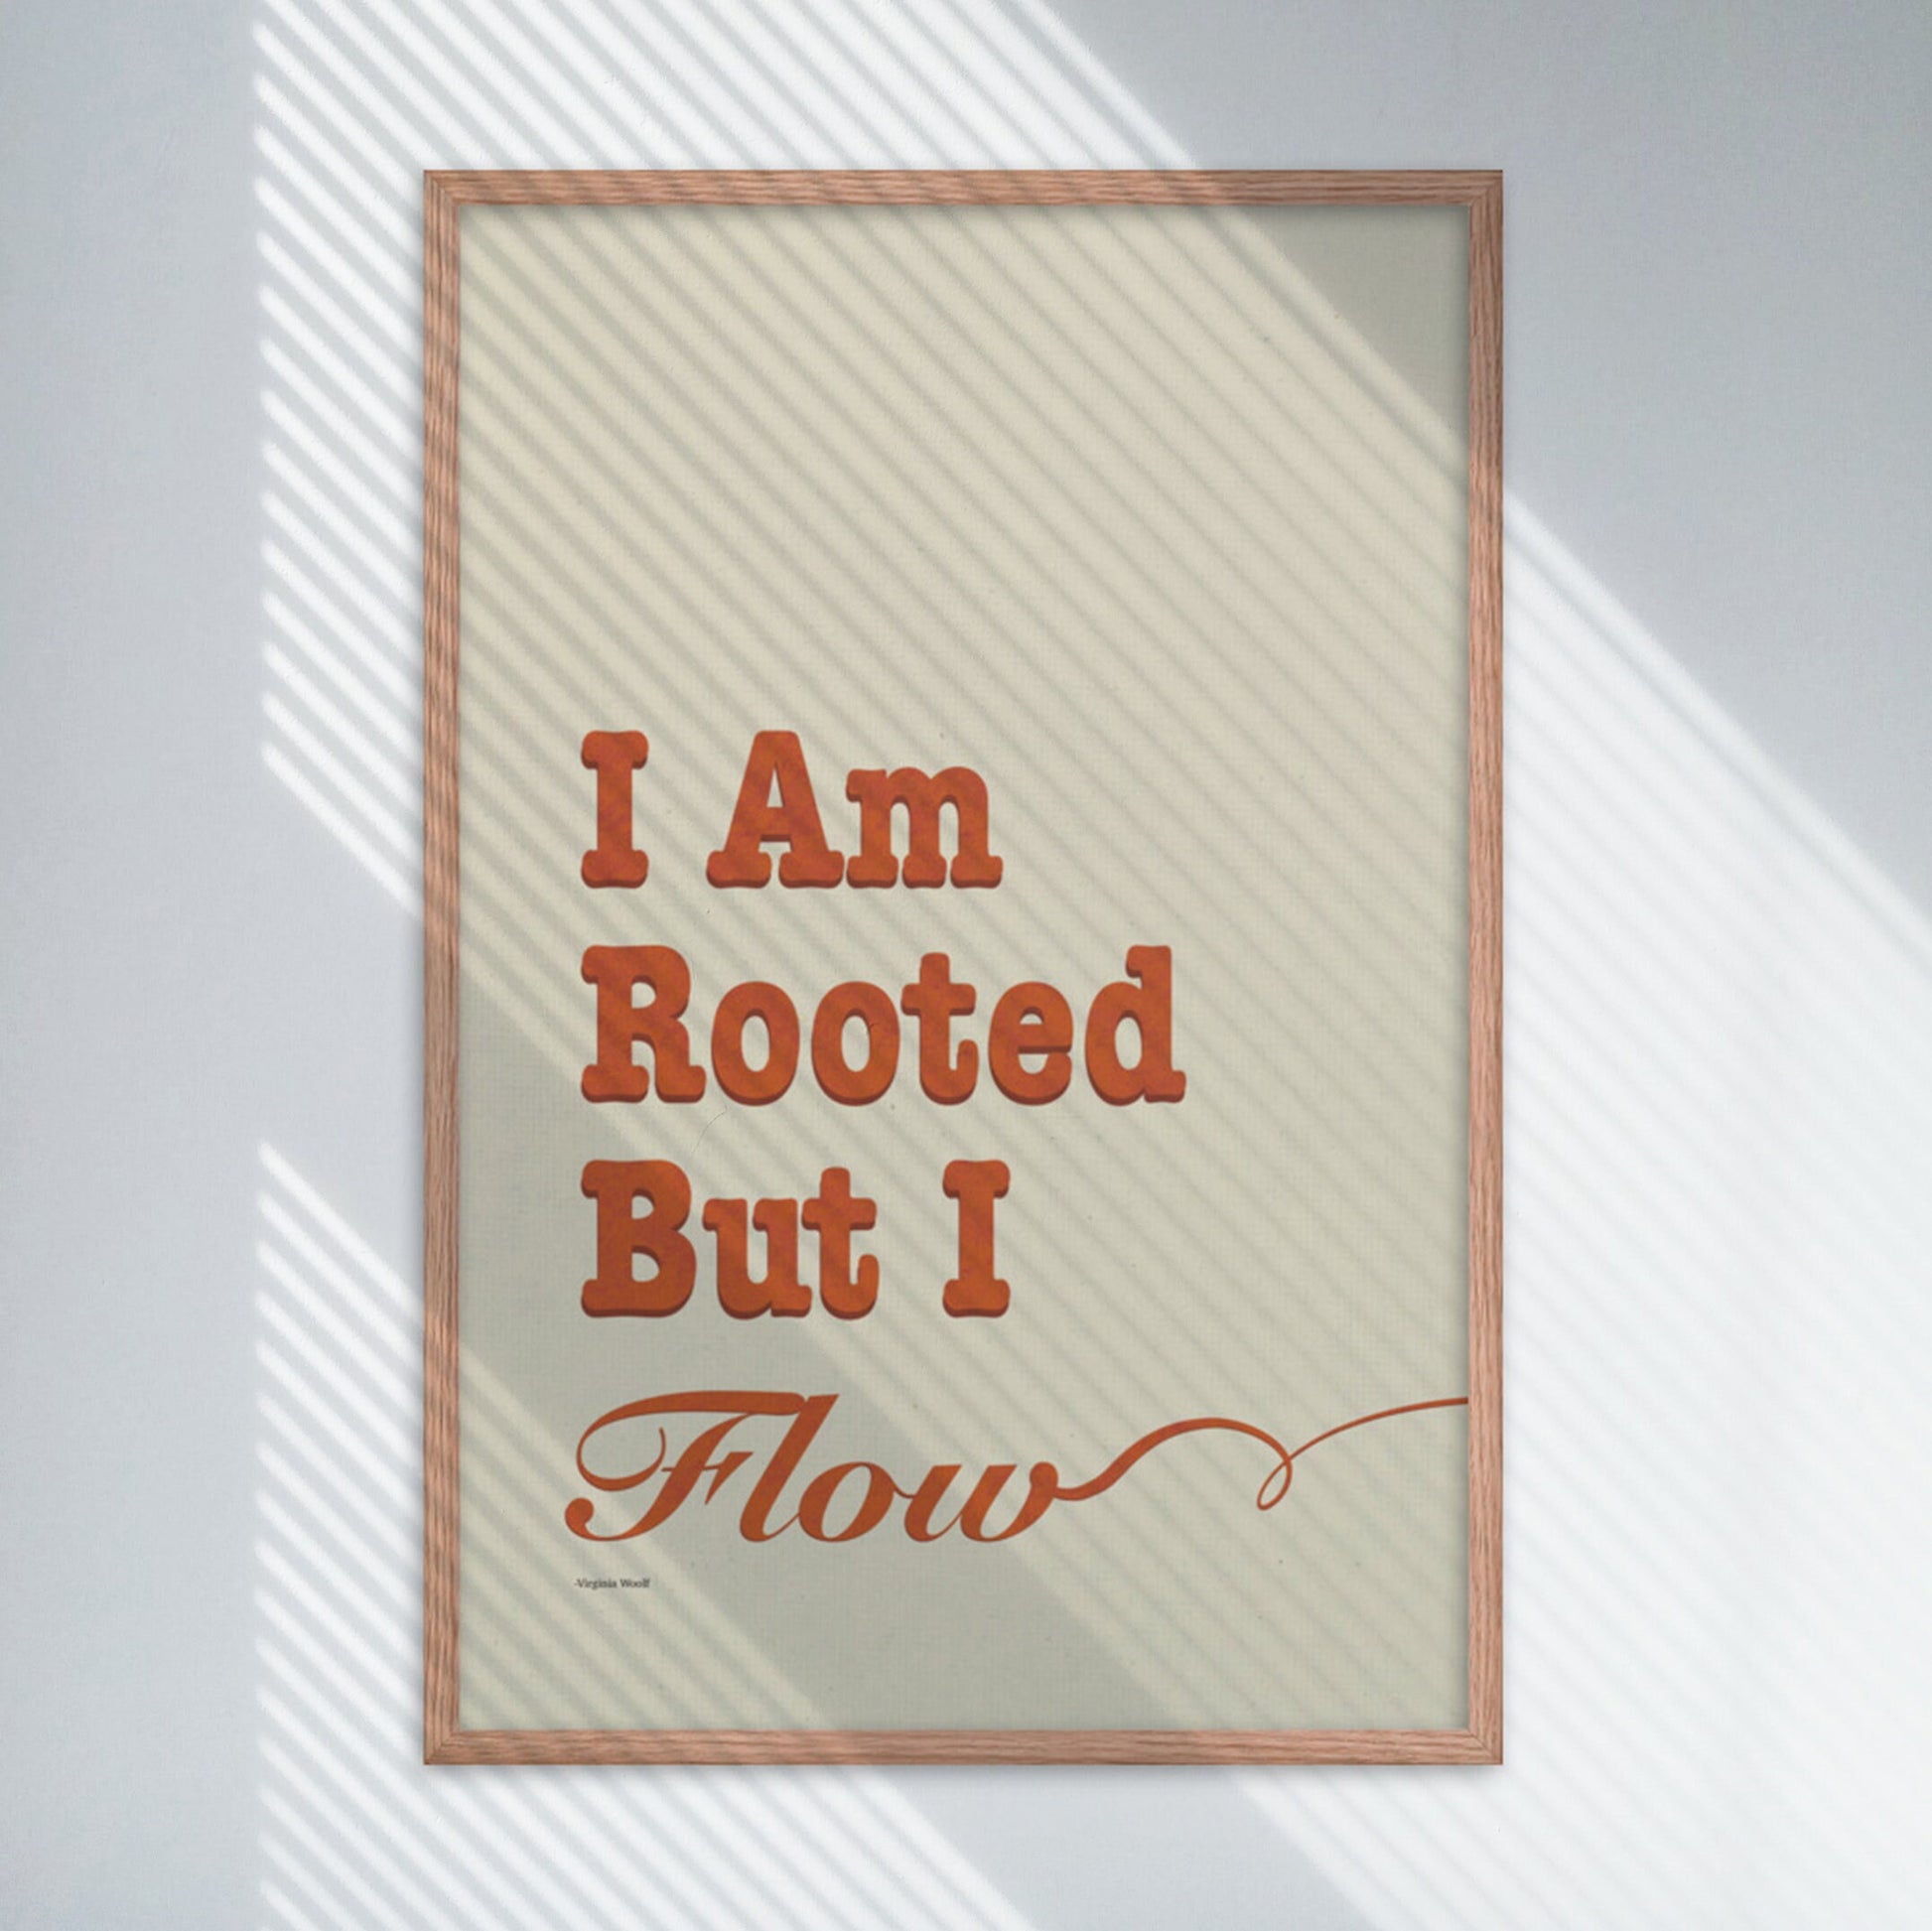 Virginia Woolf Print, I Am Rooted But I Flow, Poster/Framed Poster